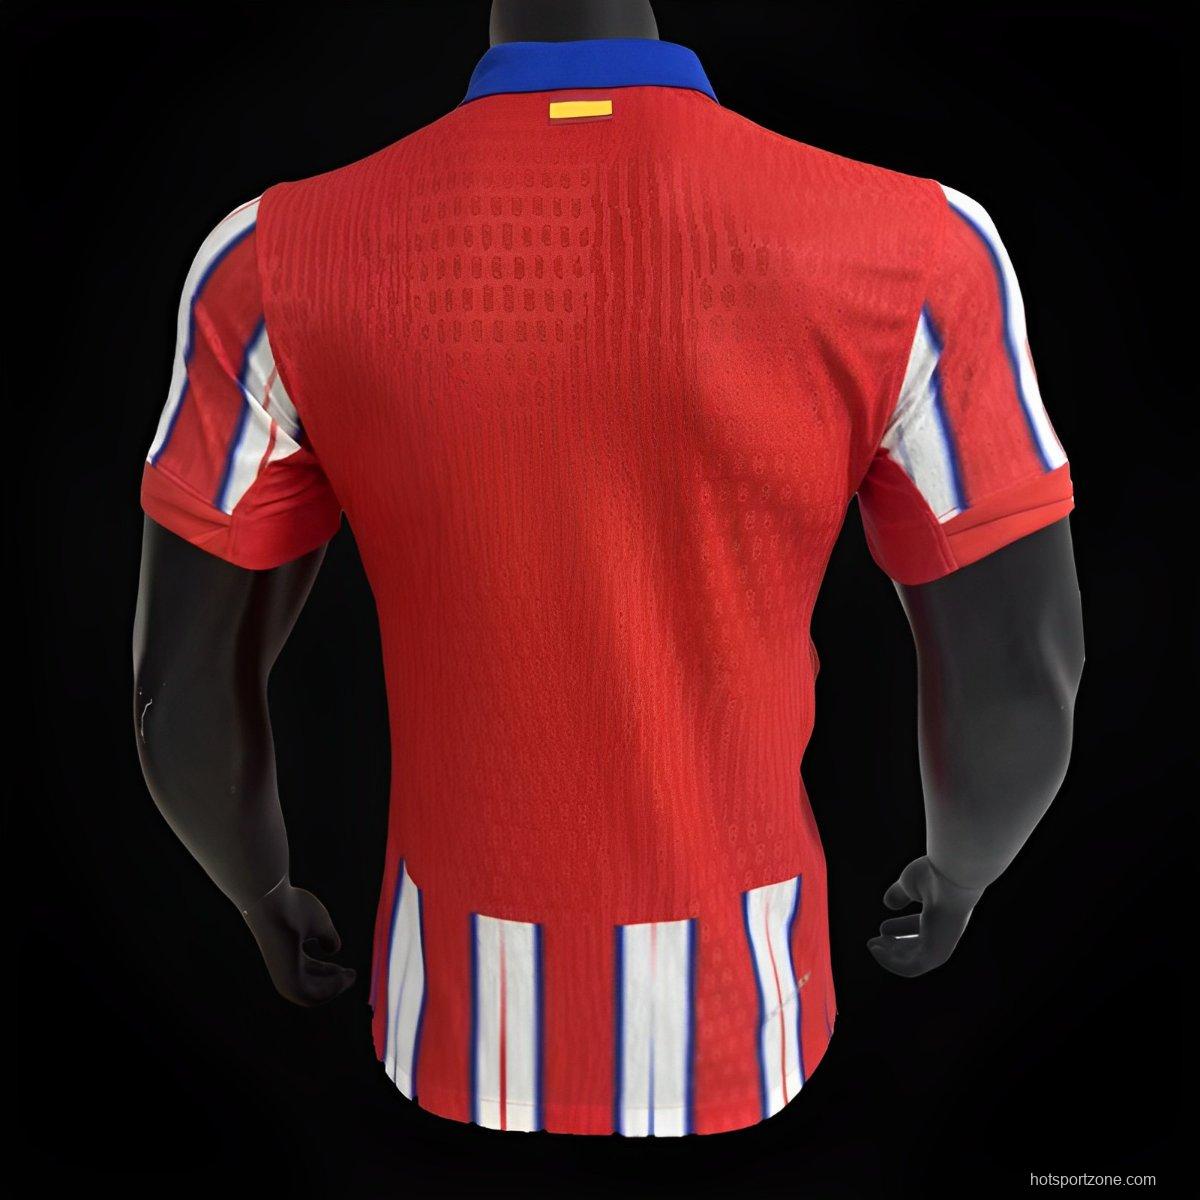 Player Version 24/25 Atletico Madrid Home Jersey